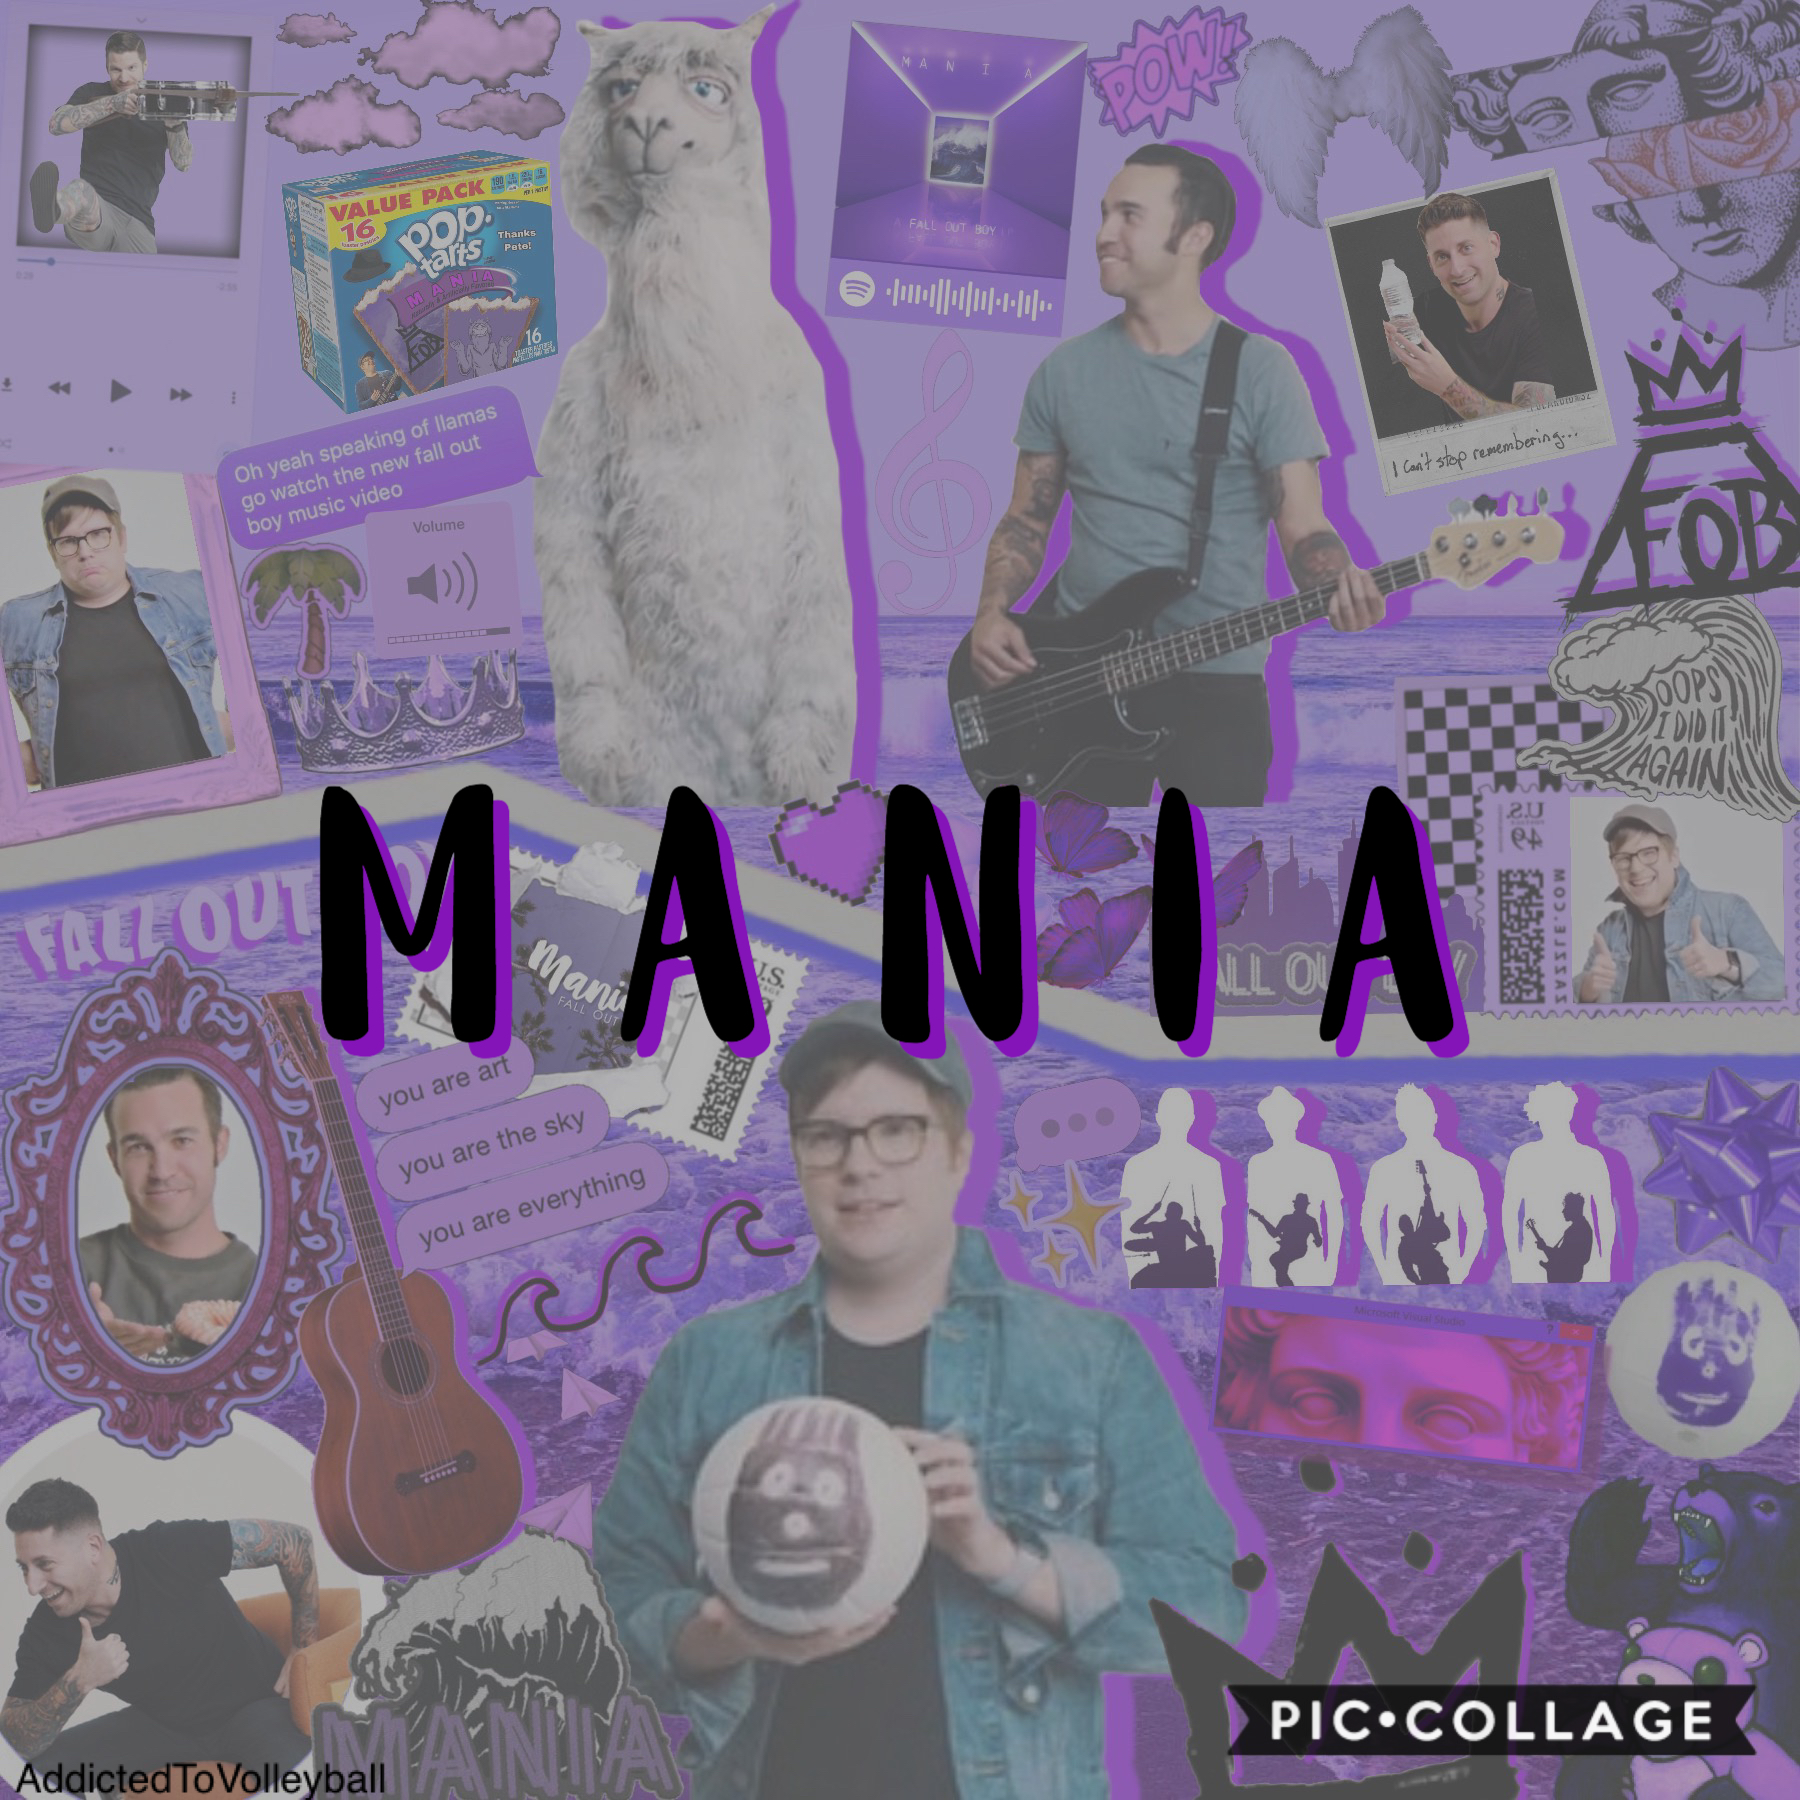 1-19-20 - two years! - tap!
happy birthday to the album that saved my life. 💜
pls take this rlly horrible collage thanks 🤠
Mania means so much to me & for it to be 2 blows my mind 🤯
QOTD: fave song on MANIA?
AOTD: Bishops Knife Trick 💜